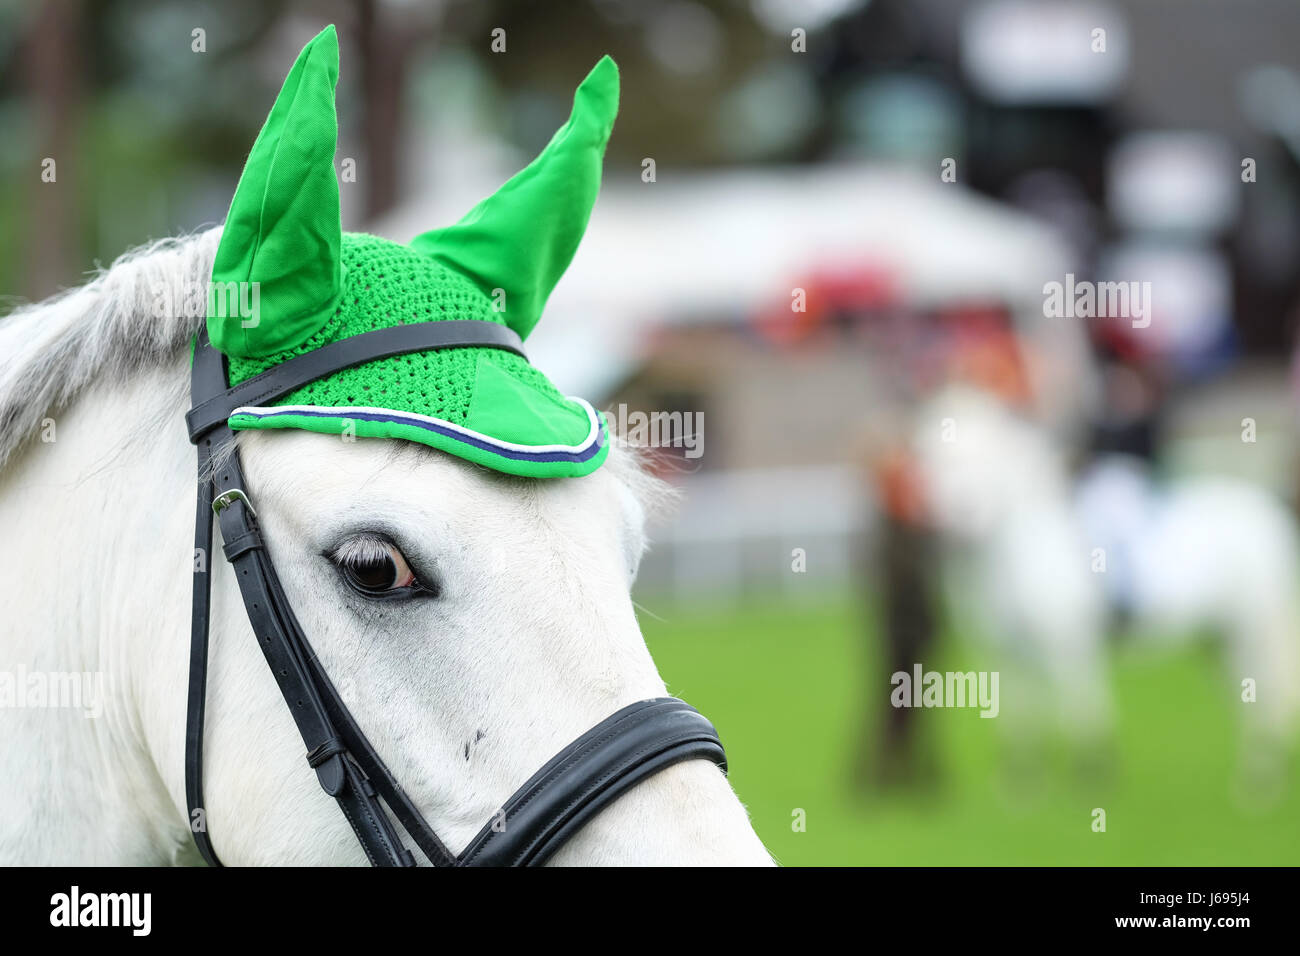 Royal Welsh Spring Festival, Builth Wells, Powys, Wales - May 2017 - A pony with a distinctive green ear hat awaits its turn to perform in the junior show jumping event. Credit: Steven May/Alamy Live News Stock Photo